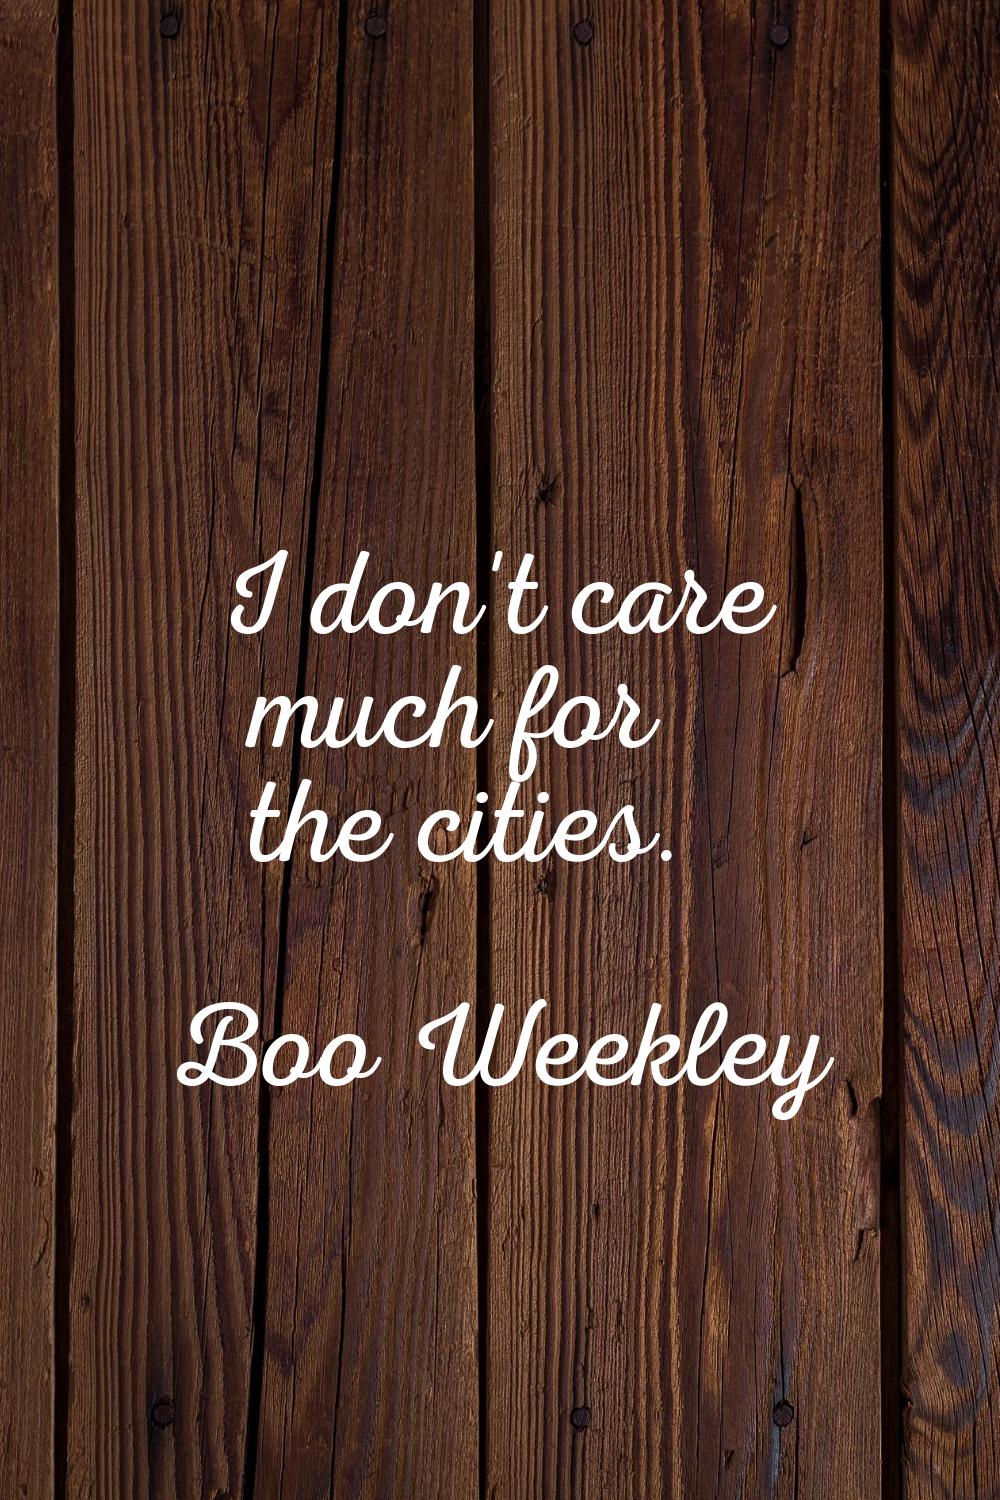 I don't care much for the cities.